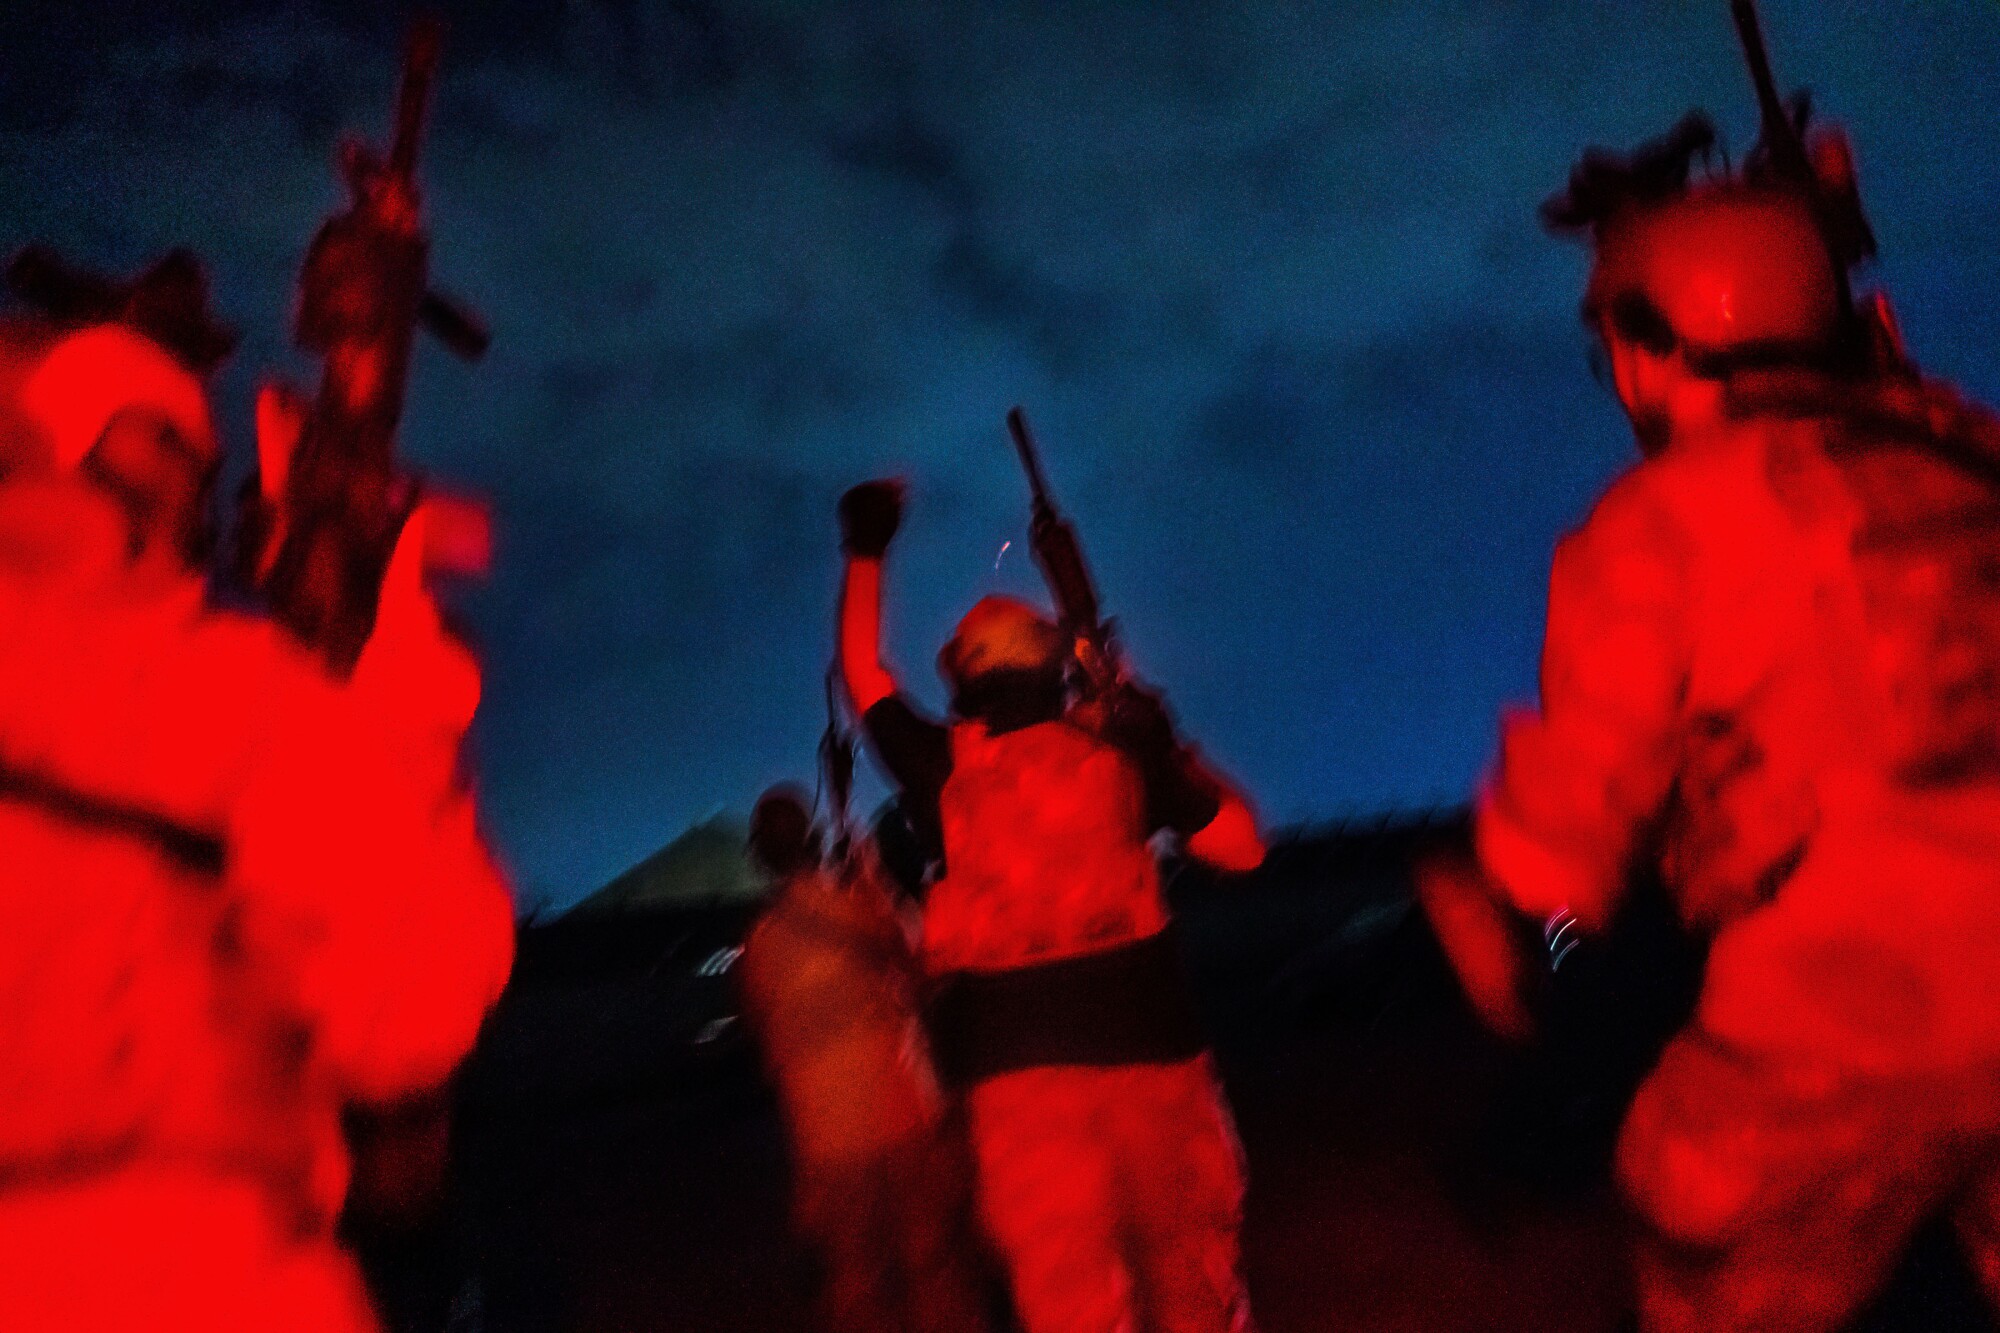 The backs of Taliban fighters illuminated red in the night, one fist raised, all of them with American gear, weaponry.